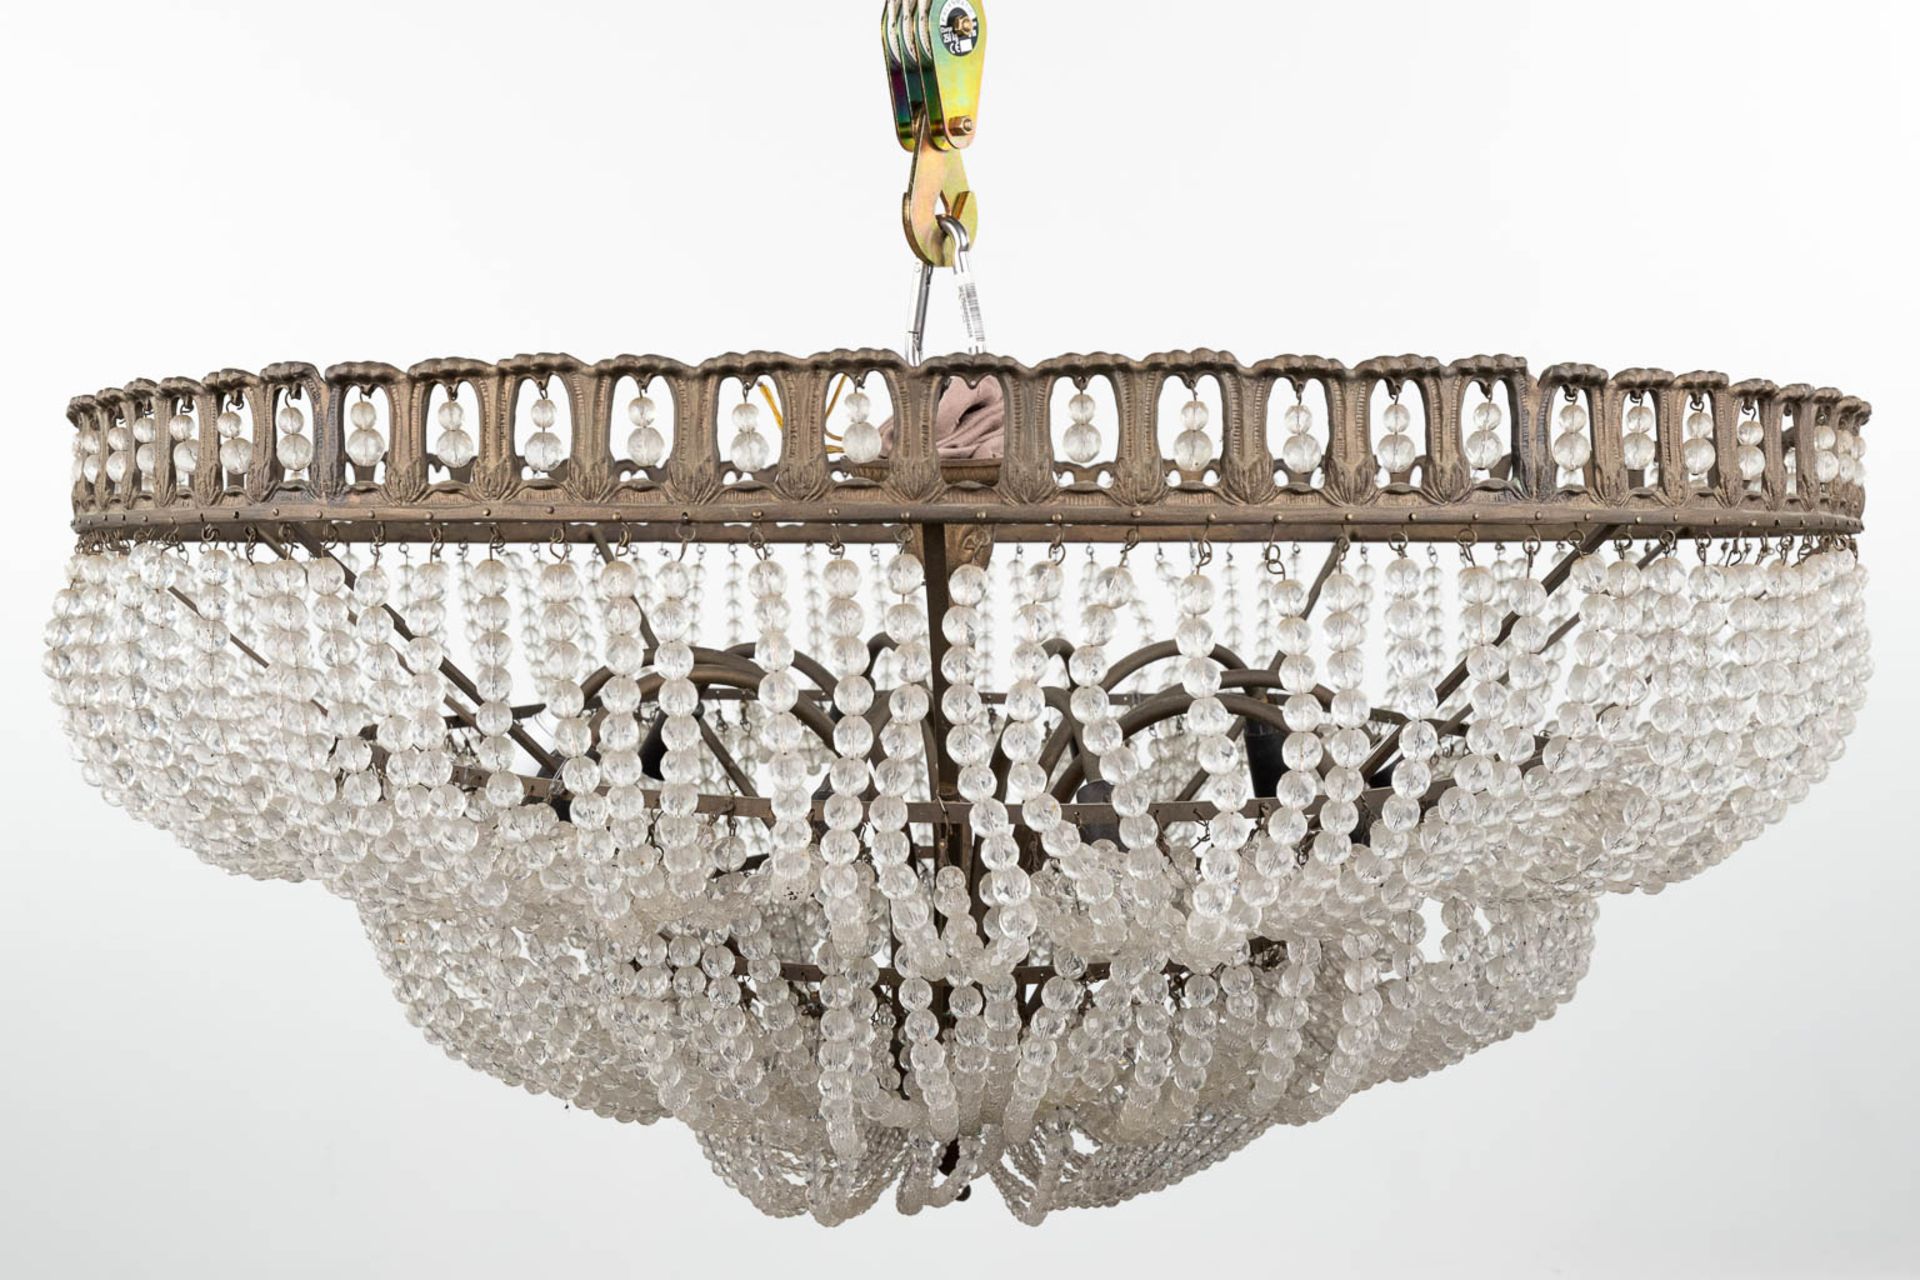 A large chandelier 'Sac A Perles' made of brass and glass. (H:40 x D:91 cm) - Image 3 of 12